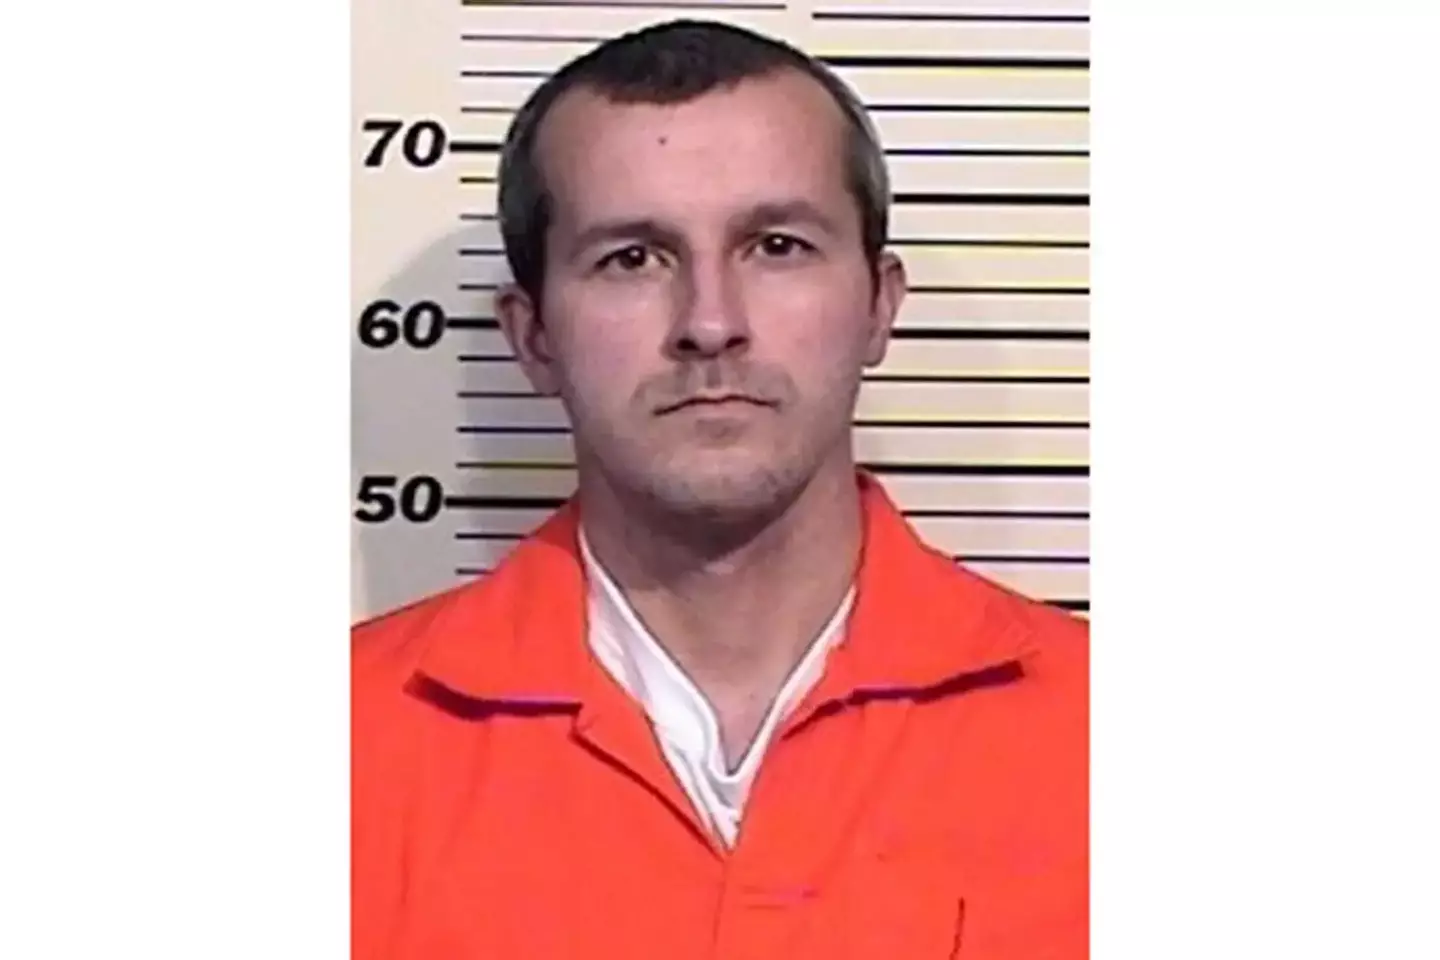 Chris Watts is serving a life sentence in prison.